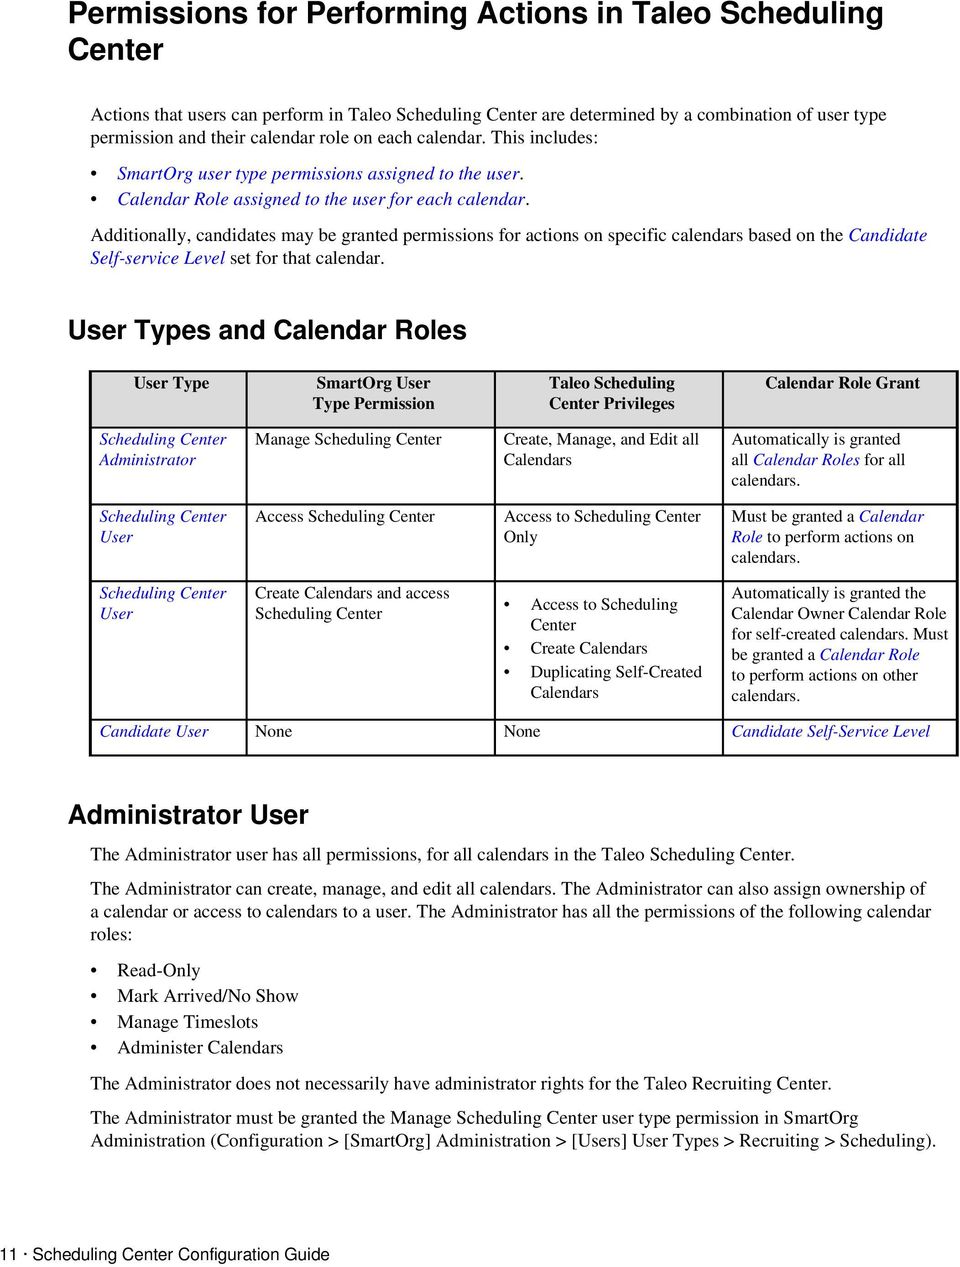 Additionally, candidates may be granted permissions for actions on specific calendars based on the Candidate Self-service Level set for that calendar.